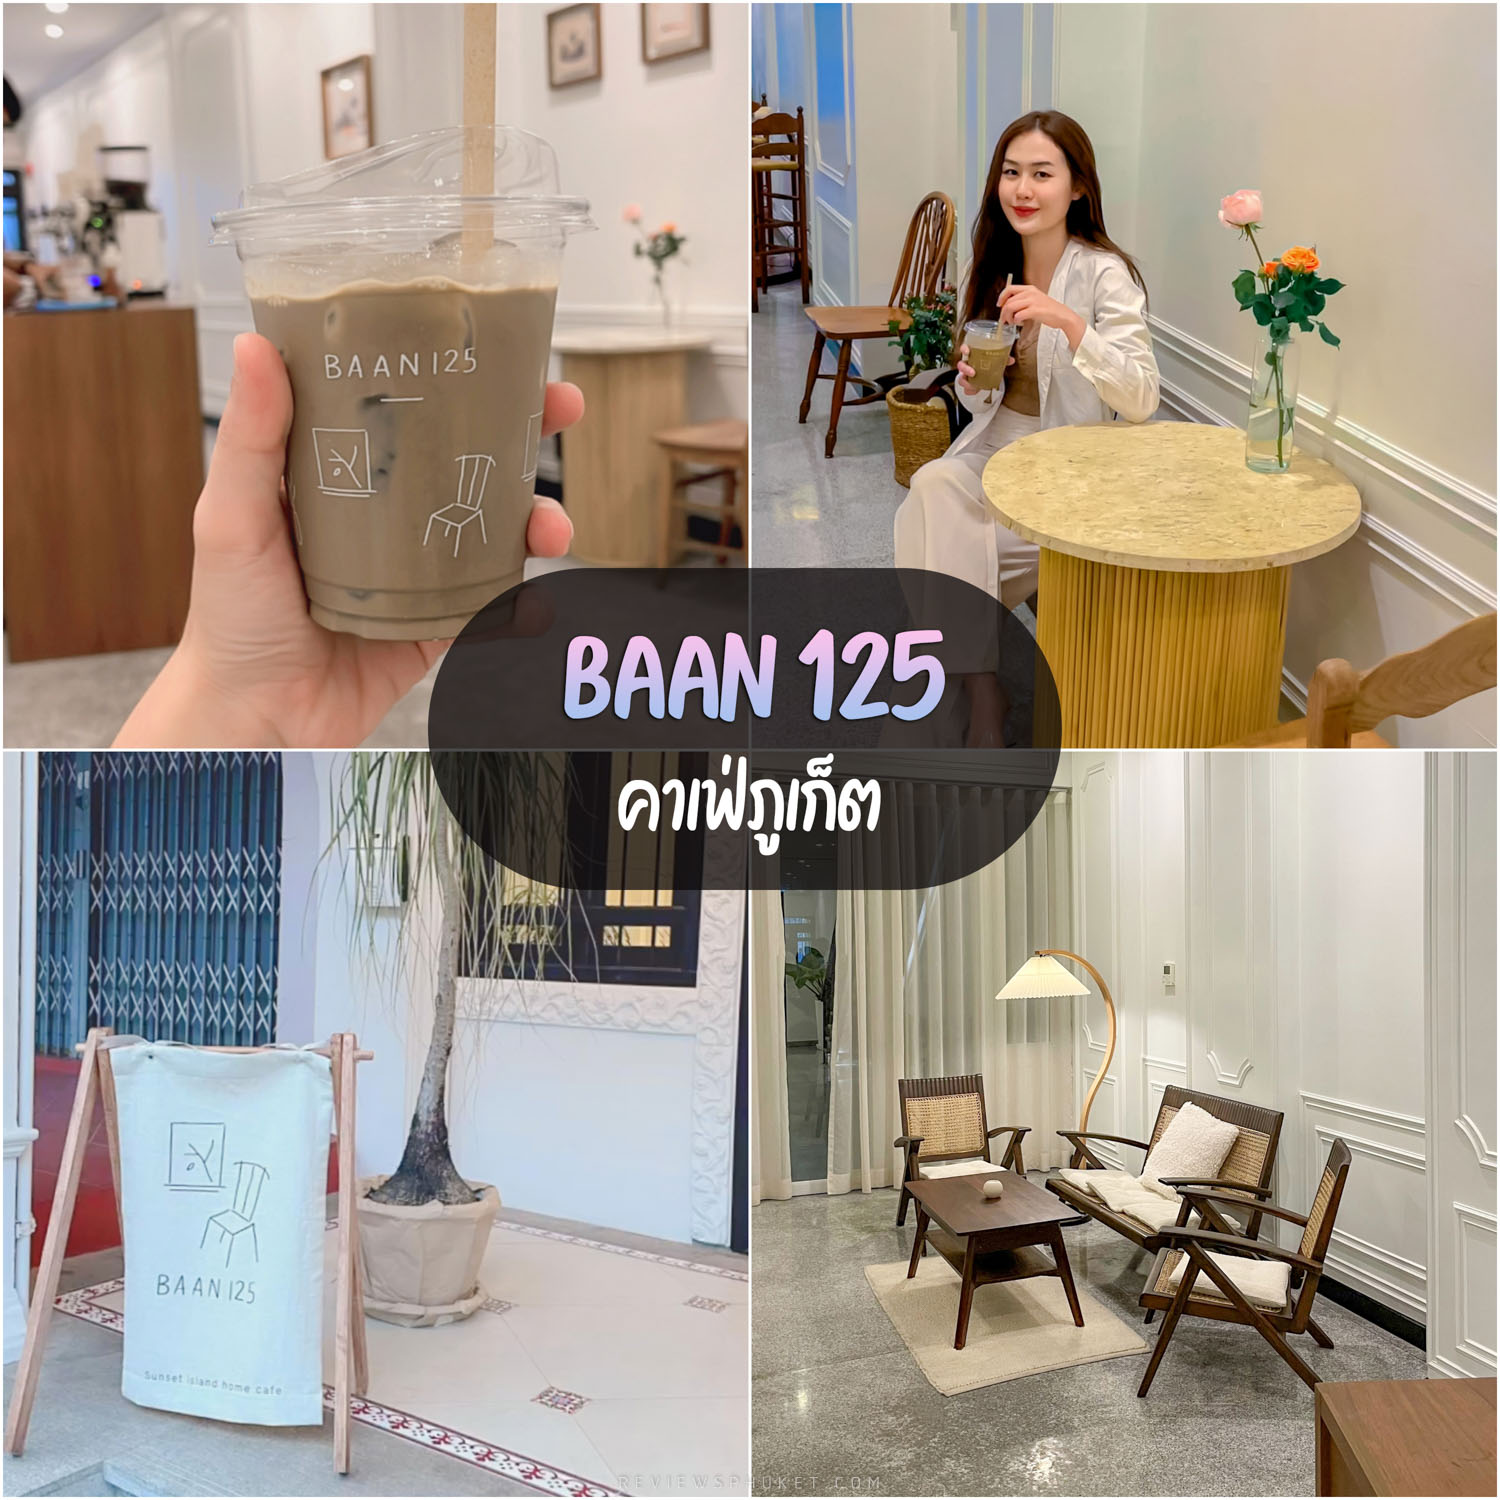 Baan125 Phuket Cafe, cute coffee shop, matcha, panna cotta, very delicious, delicious drinks.